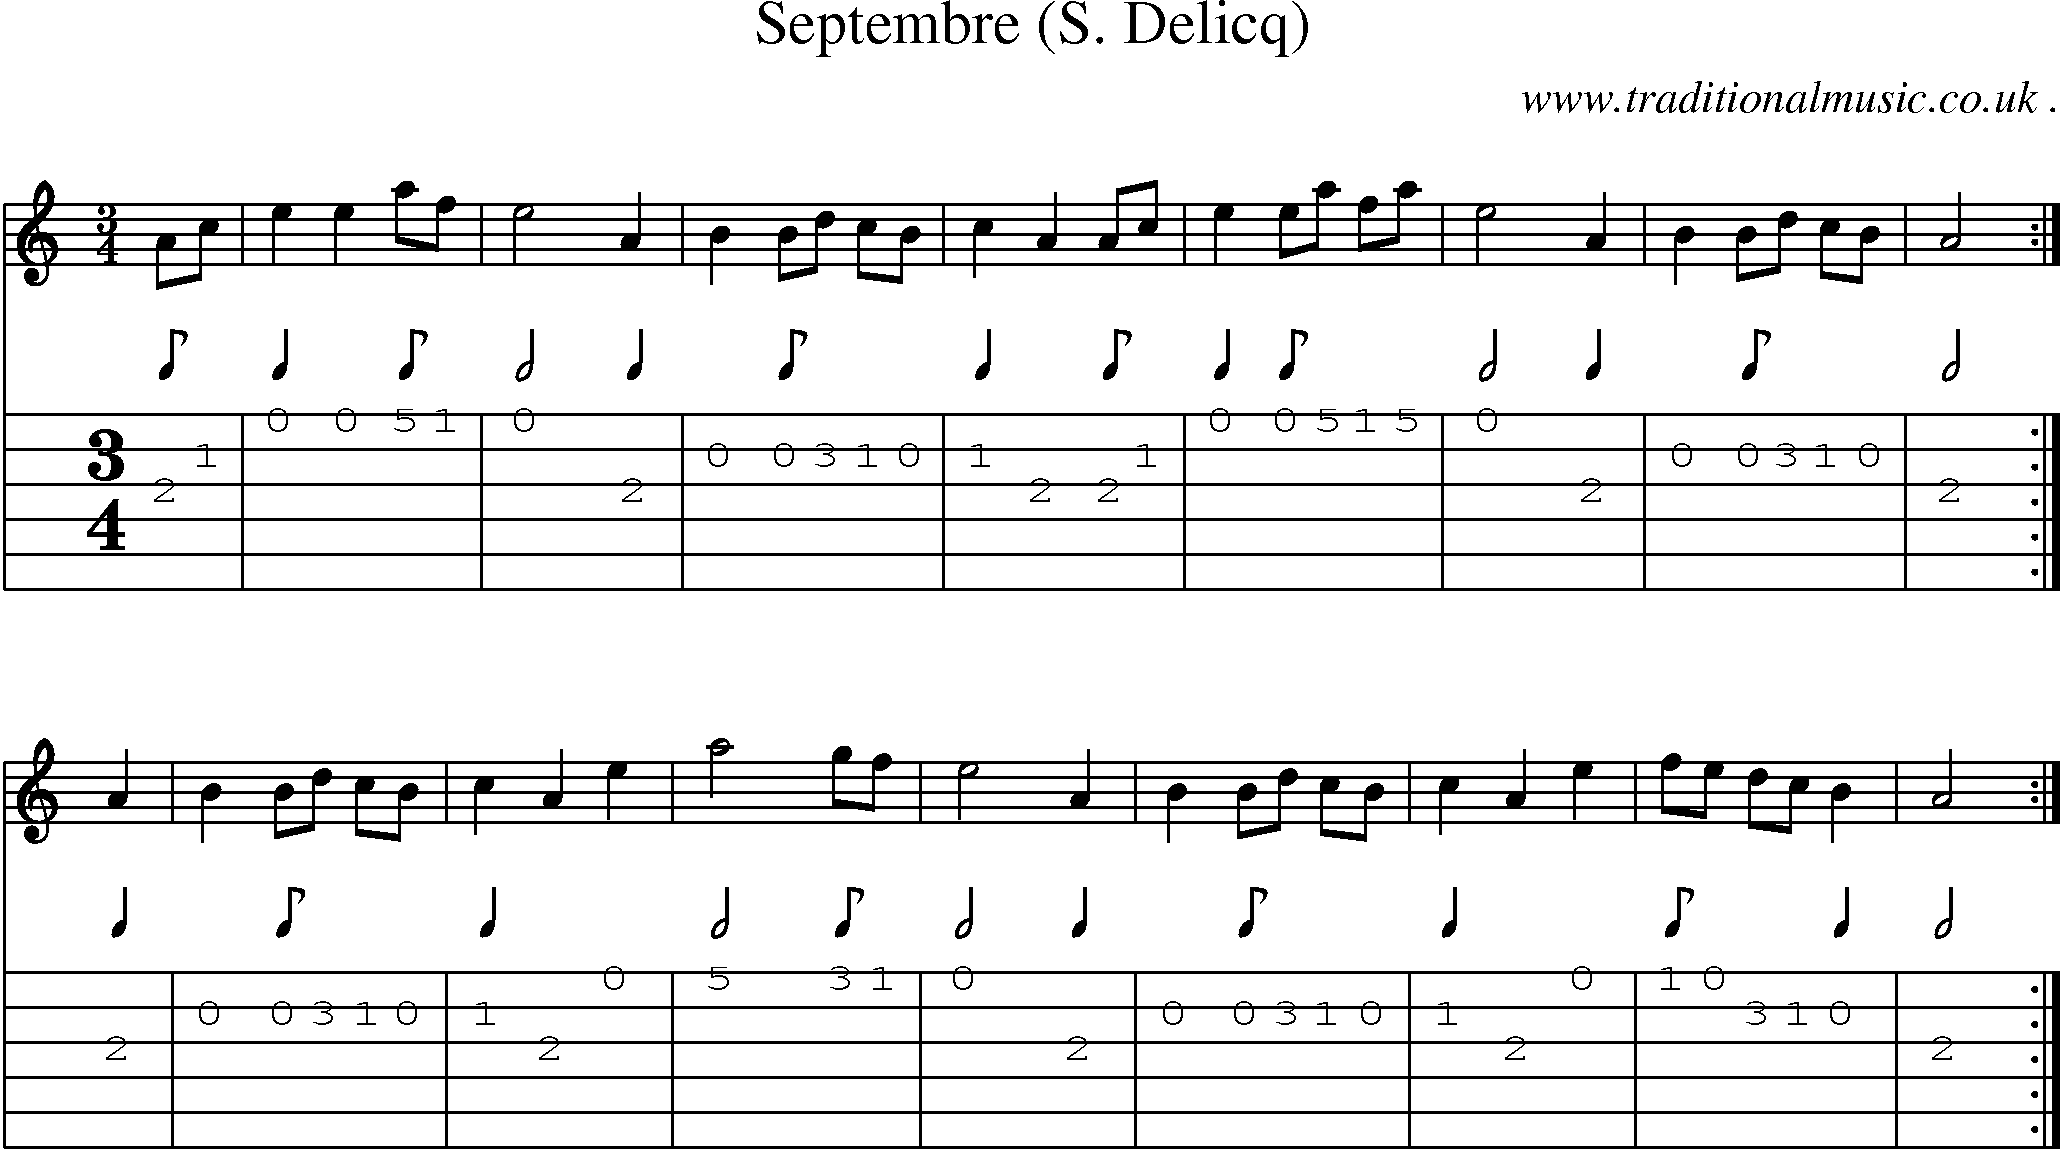 Sheet-Music and Guitar Tabs for Septembre (s Delicq)